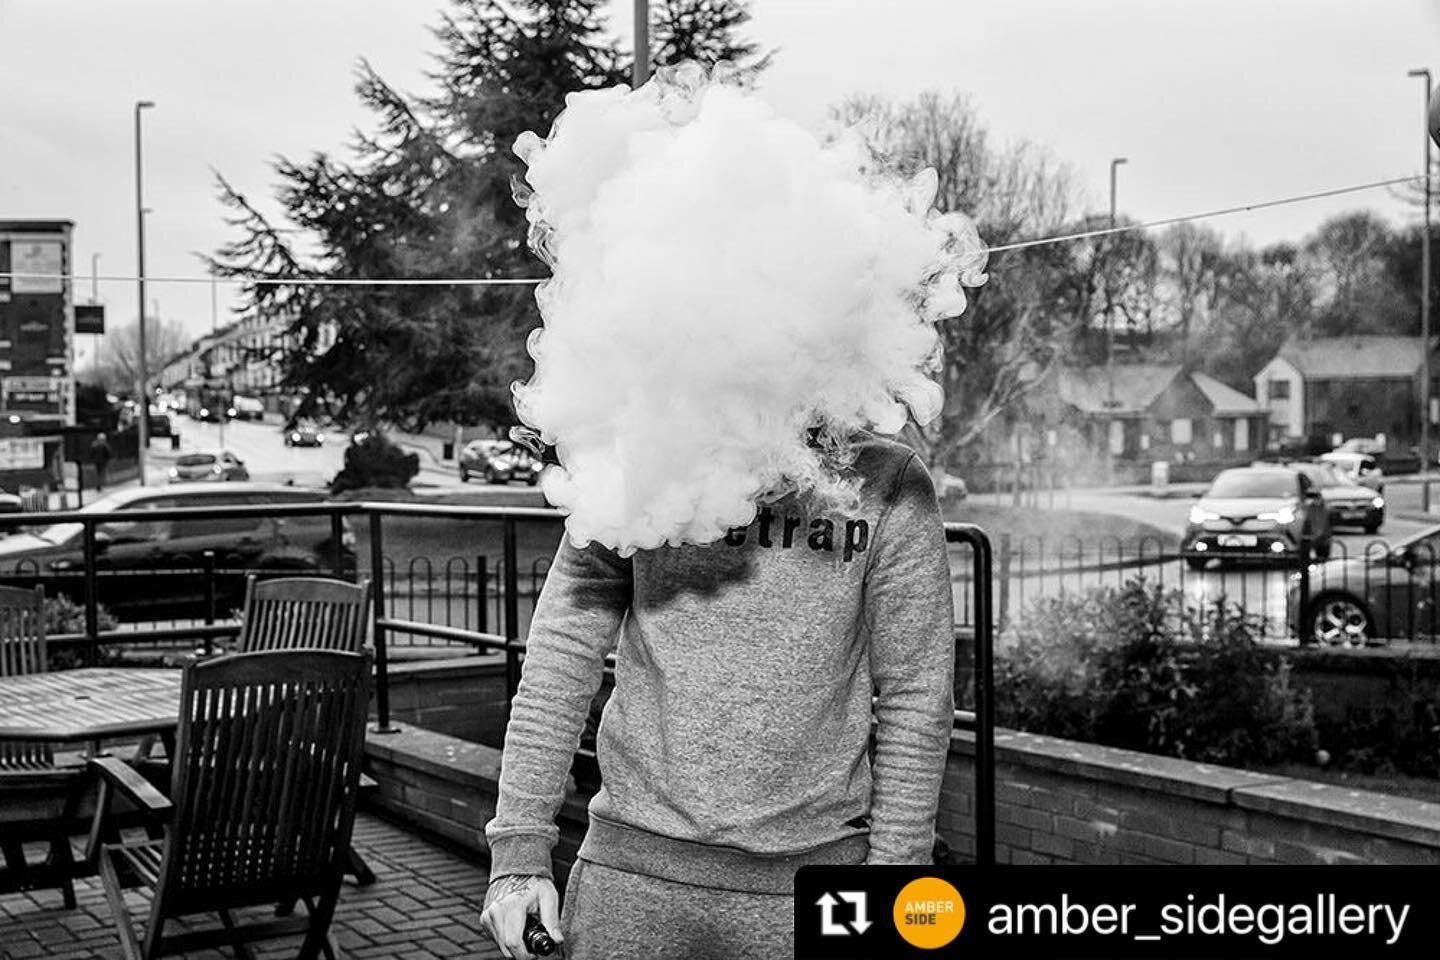 #Repost @amber_sidegallery 
・・・
We start the week by introducing our next featured photographer. Paul Alexander Knox @doctorknox is a NE based documentary photographer. 

His work, shown in Youth Rising in the UK:1981-2021, was part of an AmberSide d